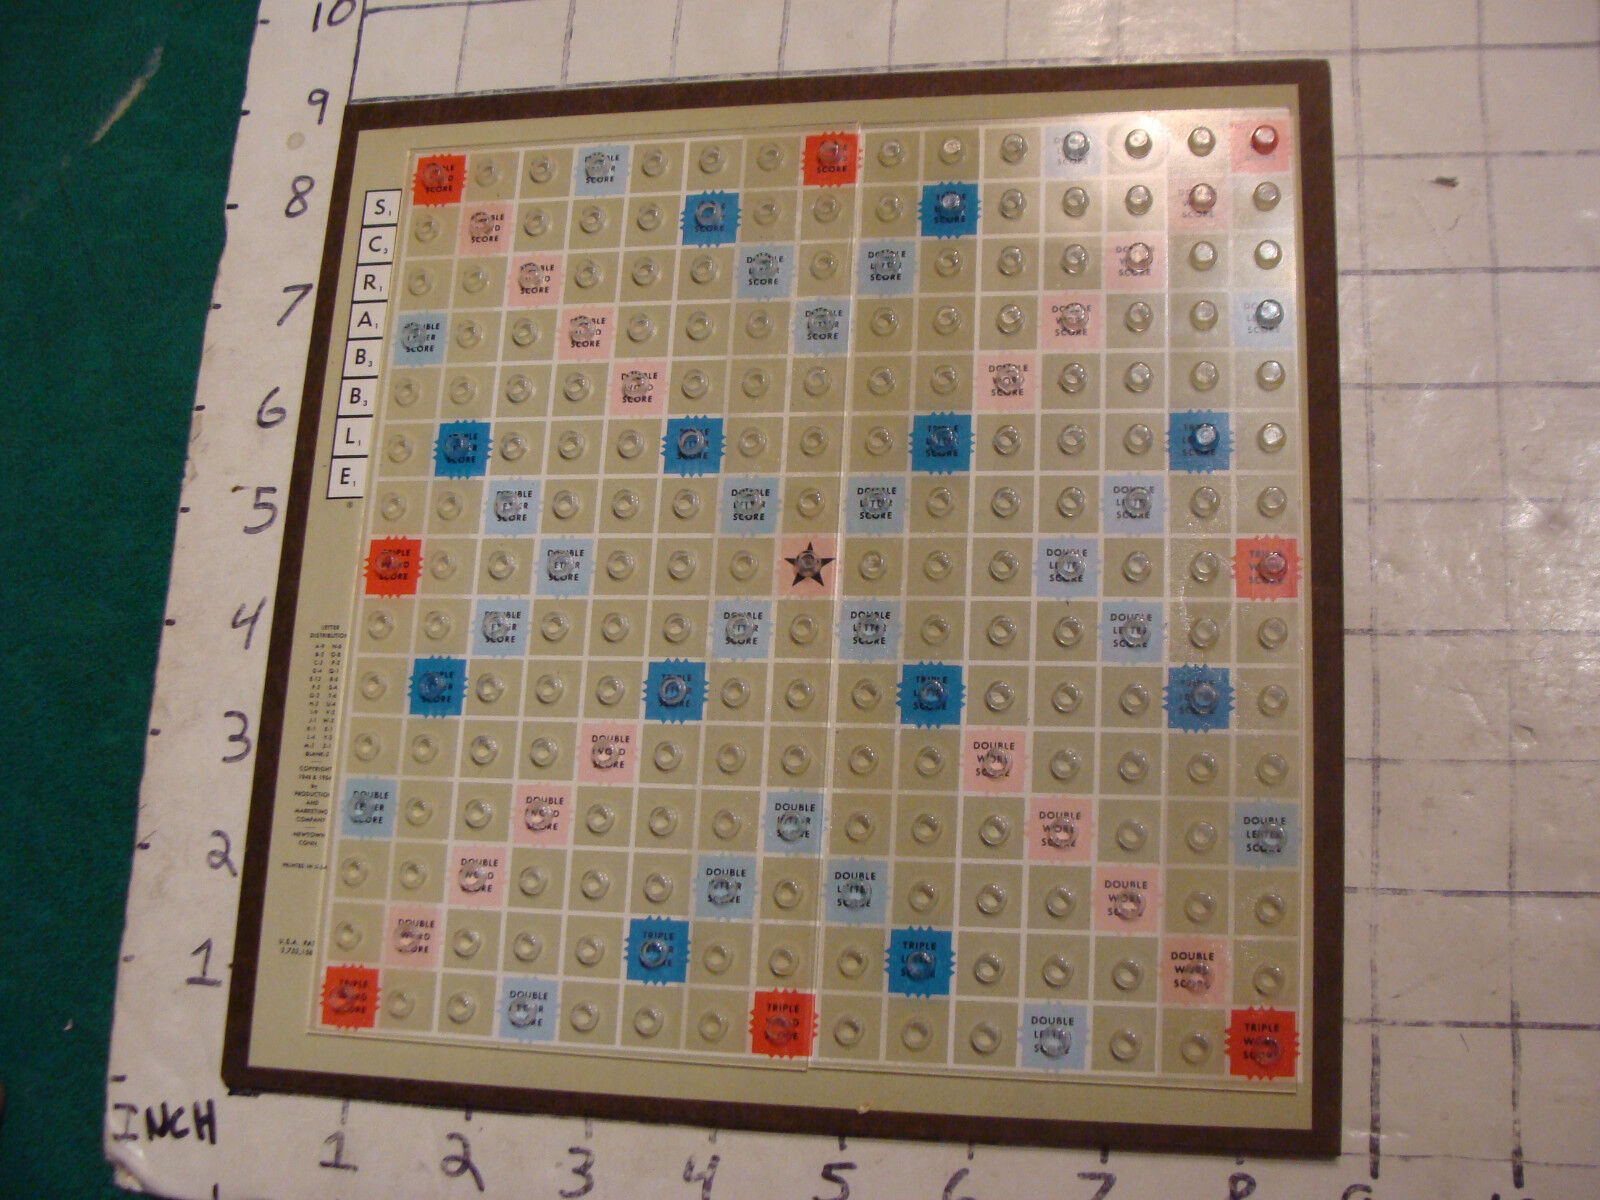 EARLY---TRAVEL---SCRABBLE, 1954 so cool SCARCE, very neat.